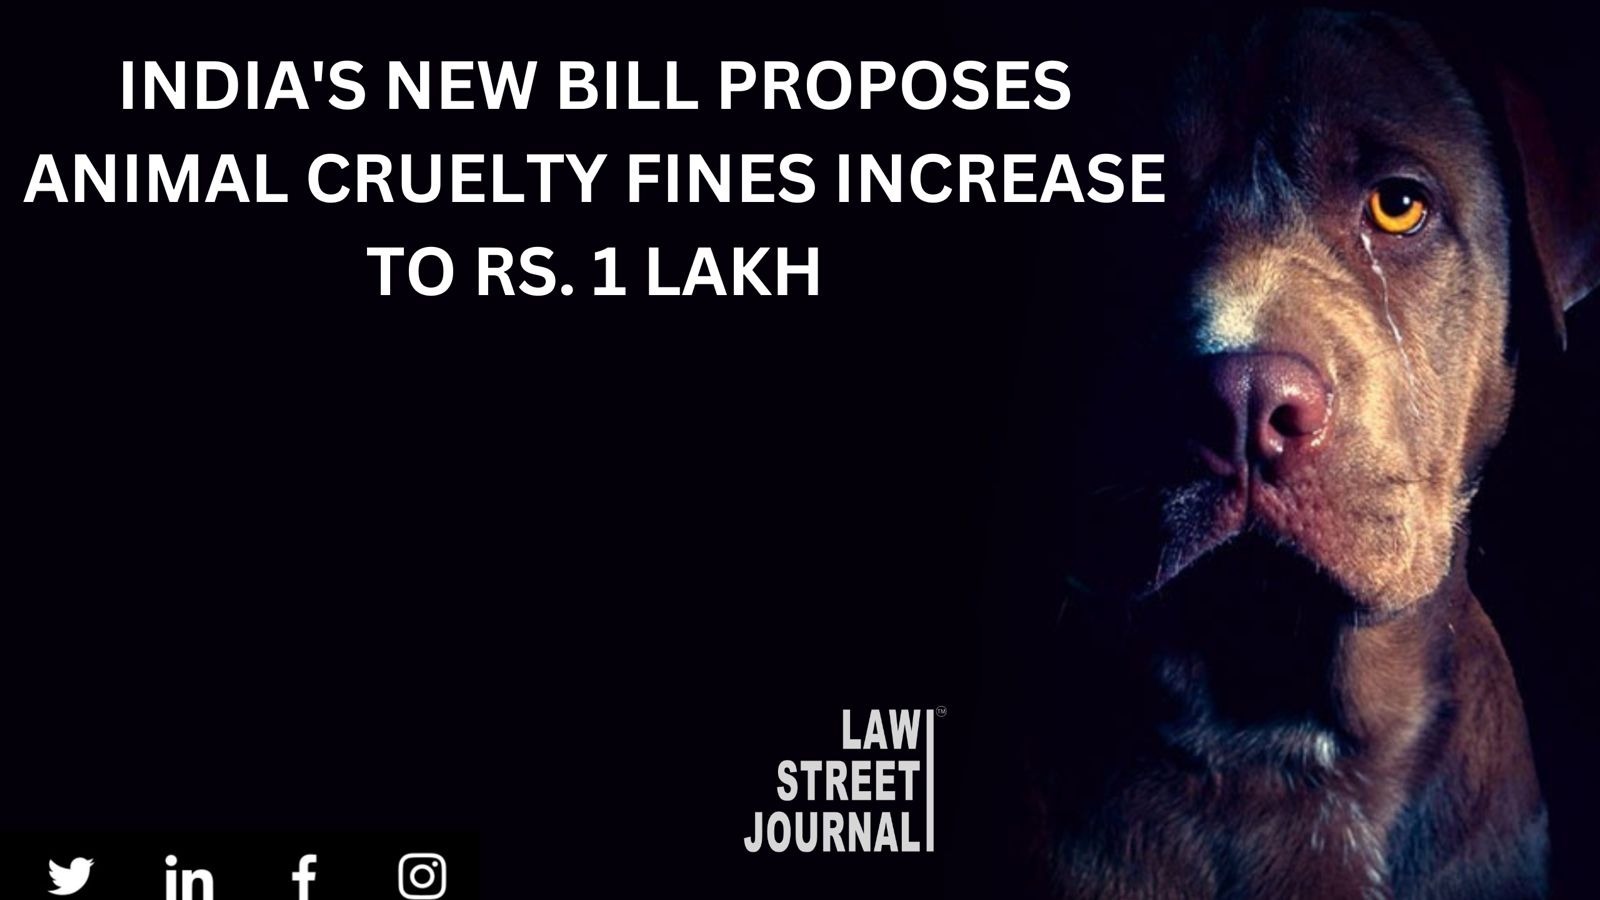 Cruelty to animals: New Bill proposes increase in fine from Rs. 50 to Rs. 1 lakh